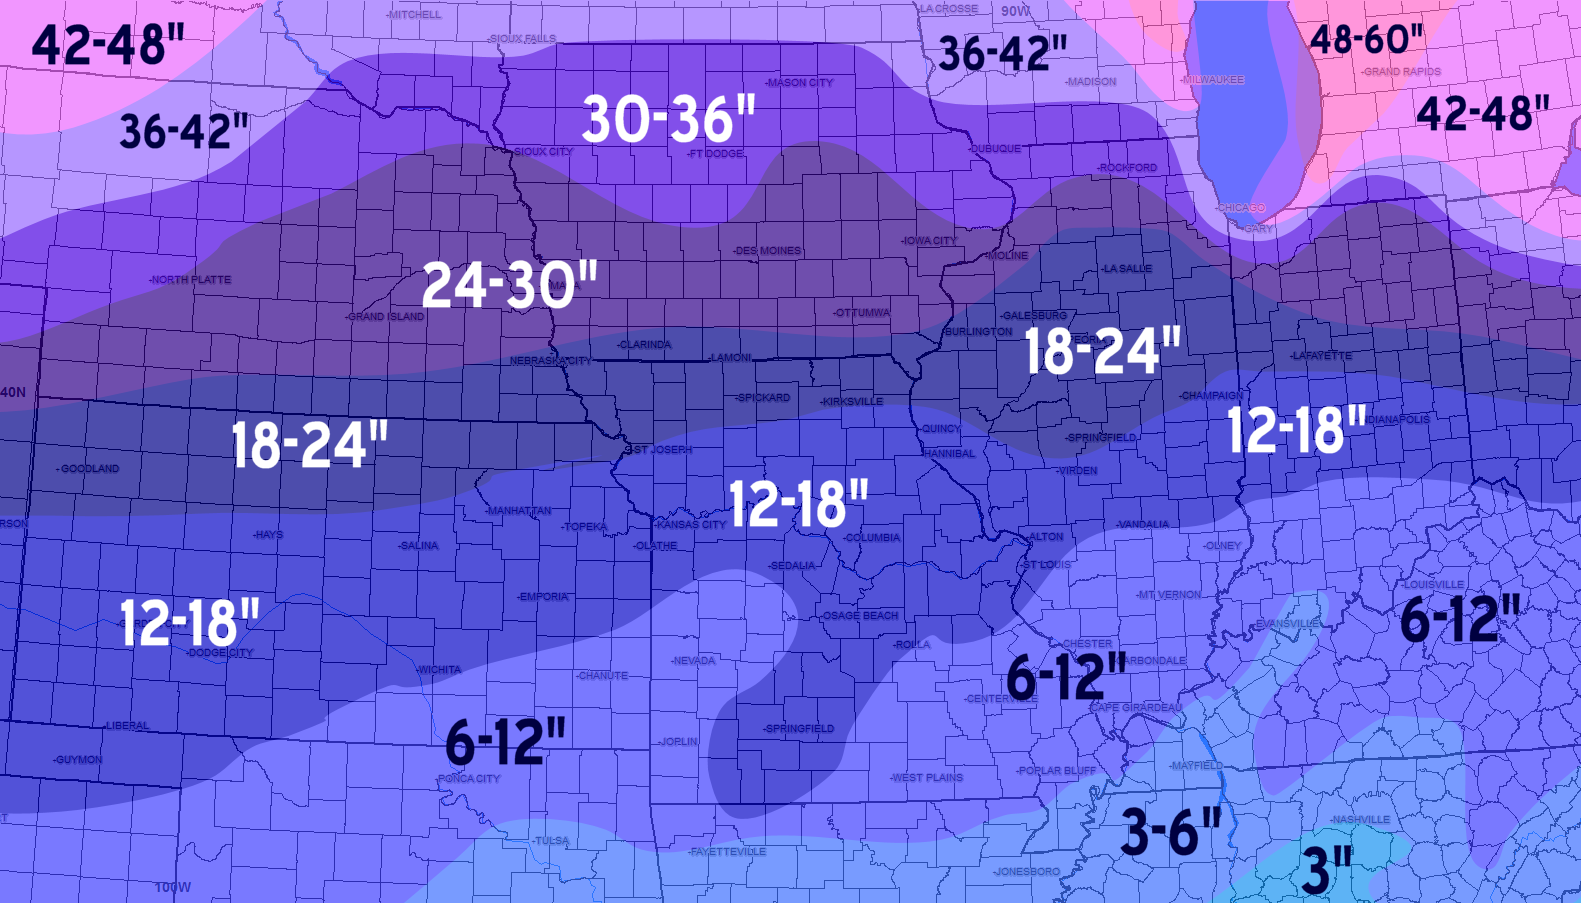 The Winter of 2012-2013: The winter that almost wasn’t | Missouri/S Illinois Weather Center Blog